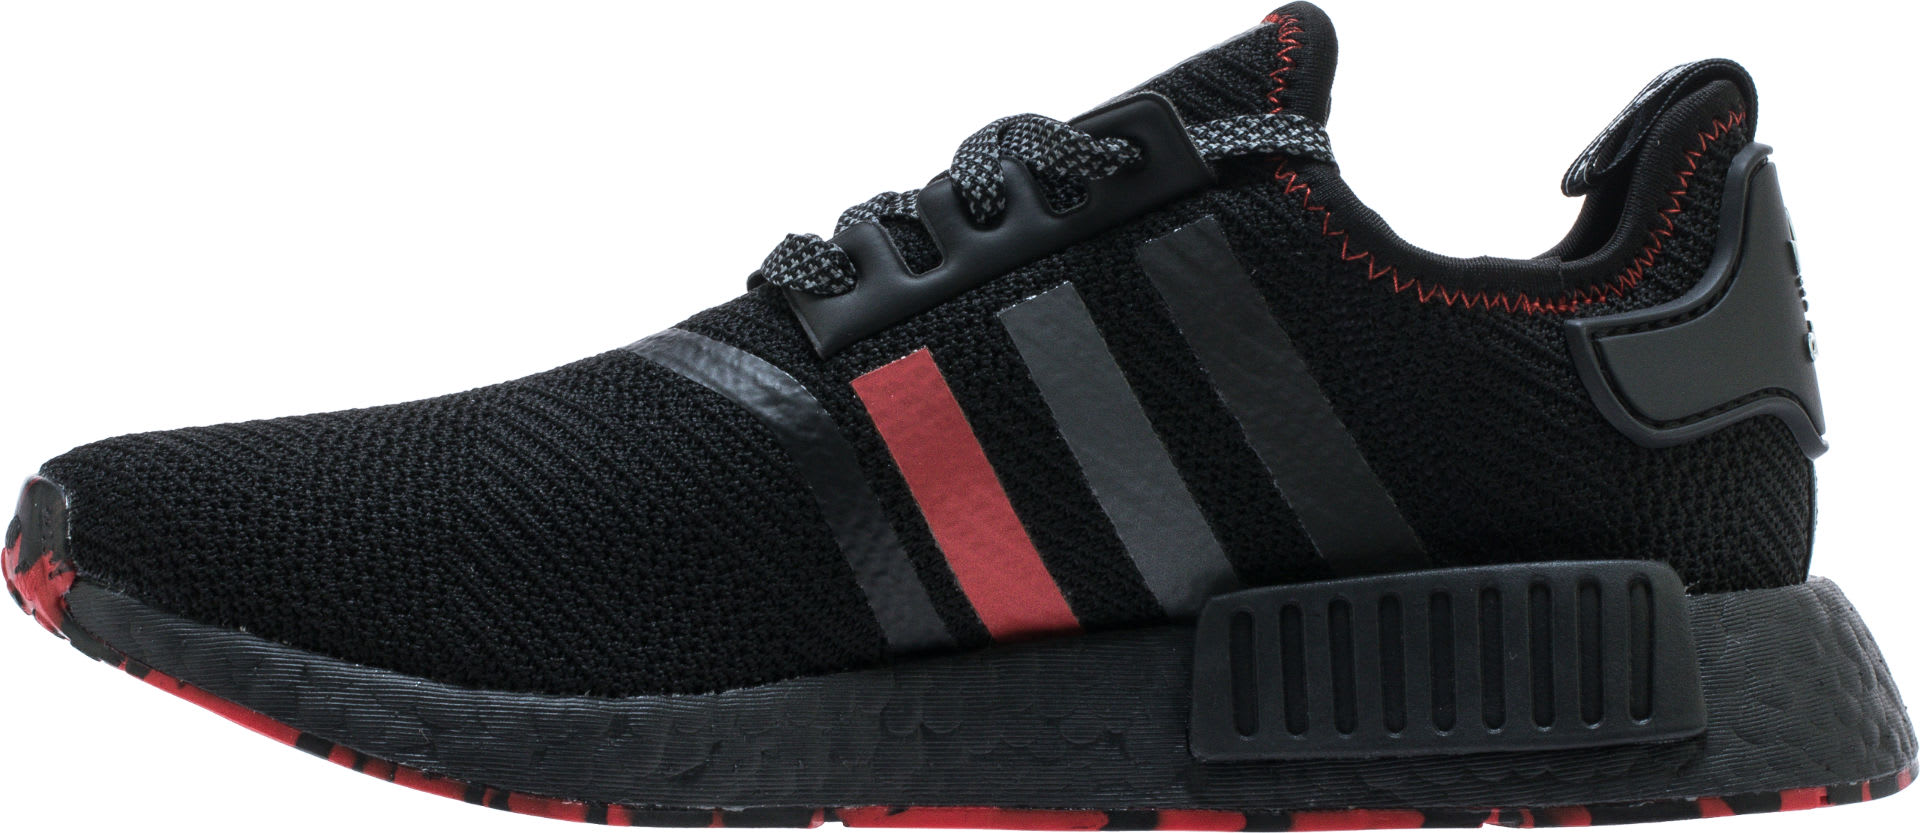 adidas-nmd-r1-red-marble-g26514-medial